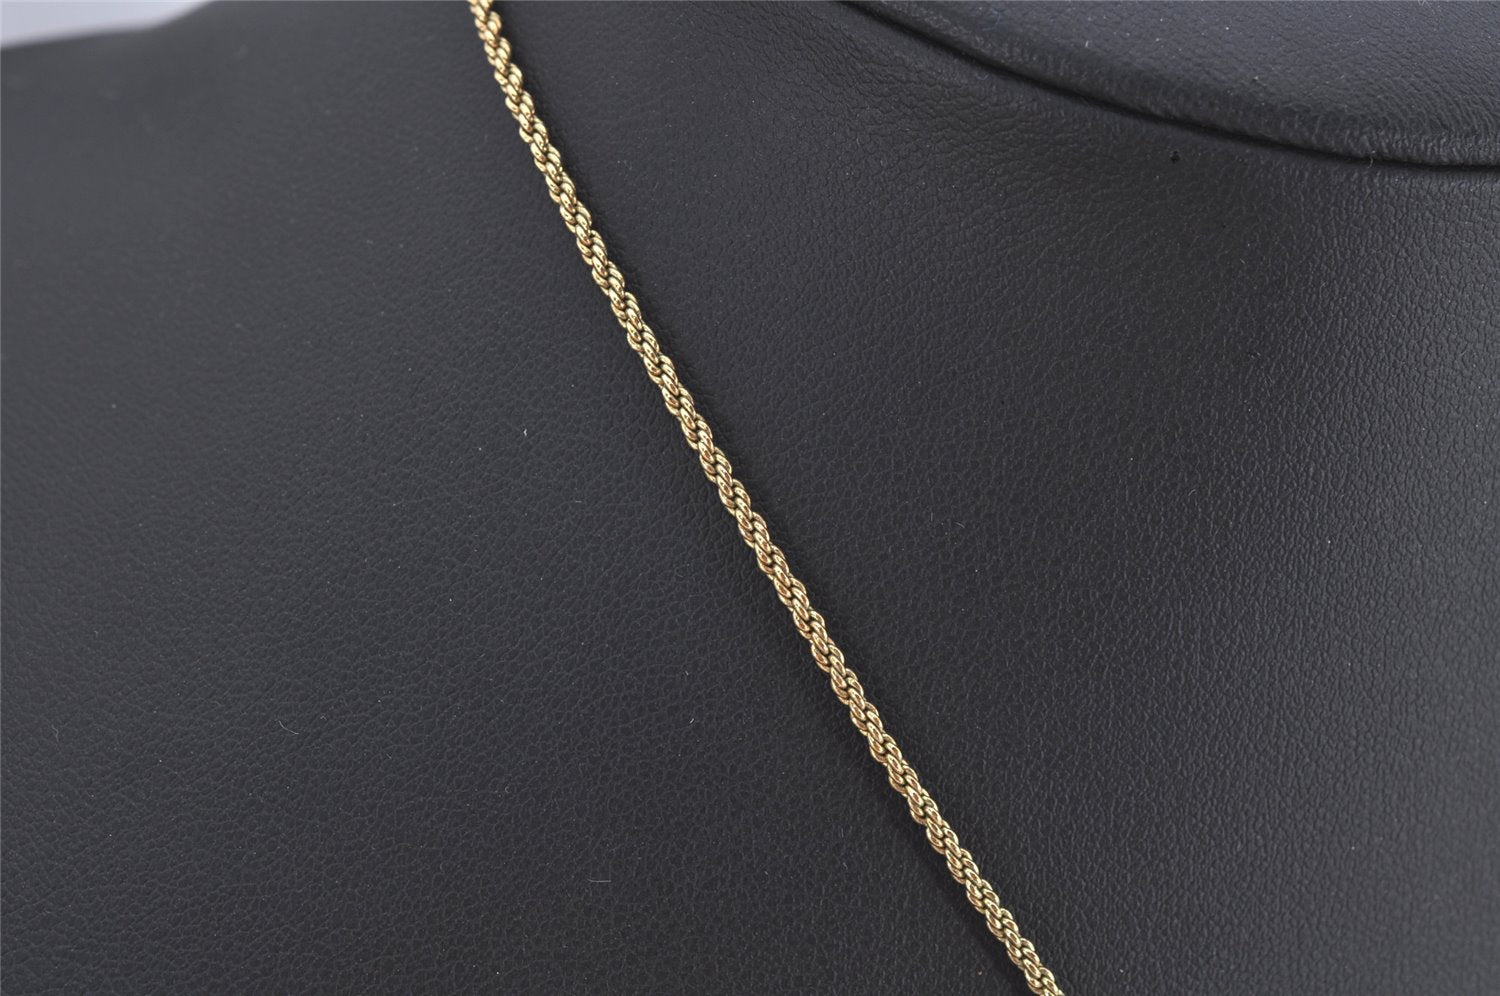 Authentic Christian Dior Gold Tone Chain Pendant Necklace CD 0214K